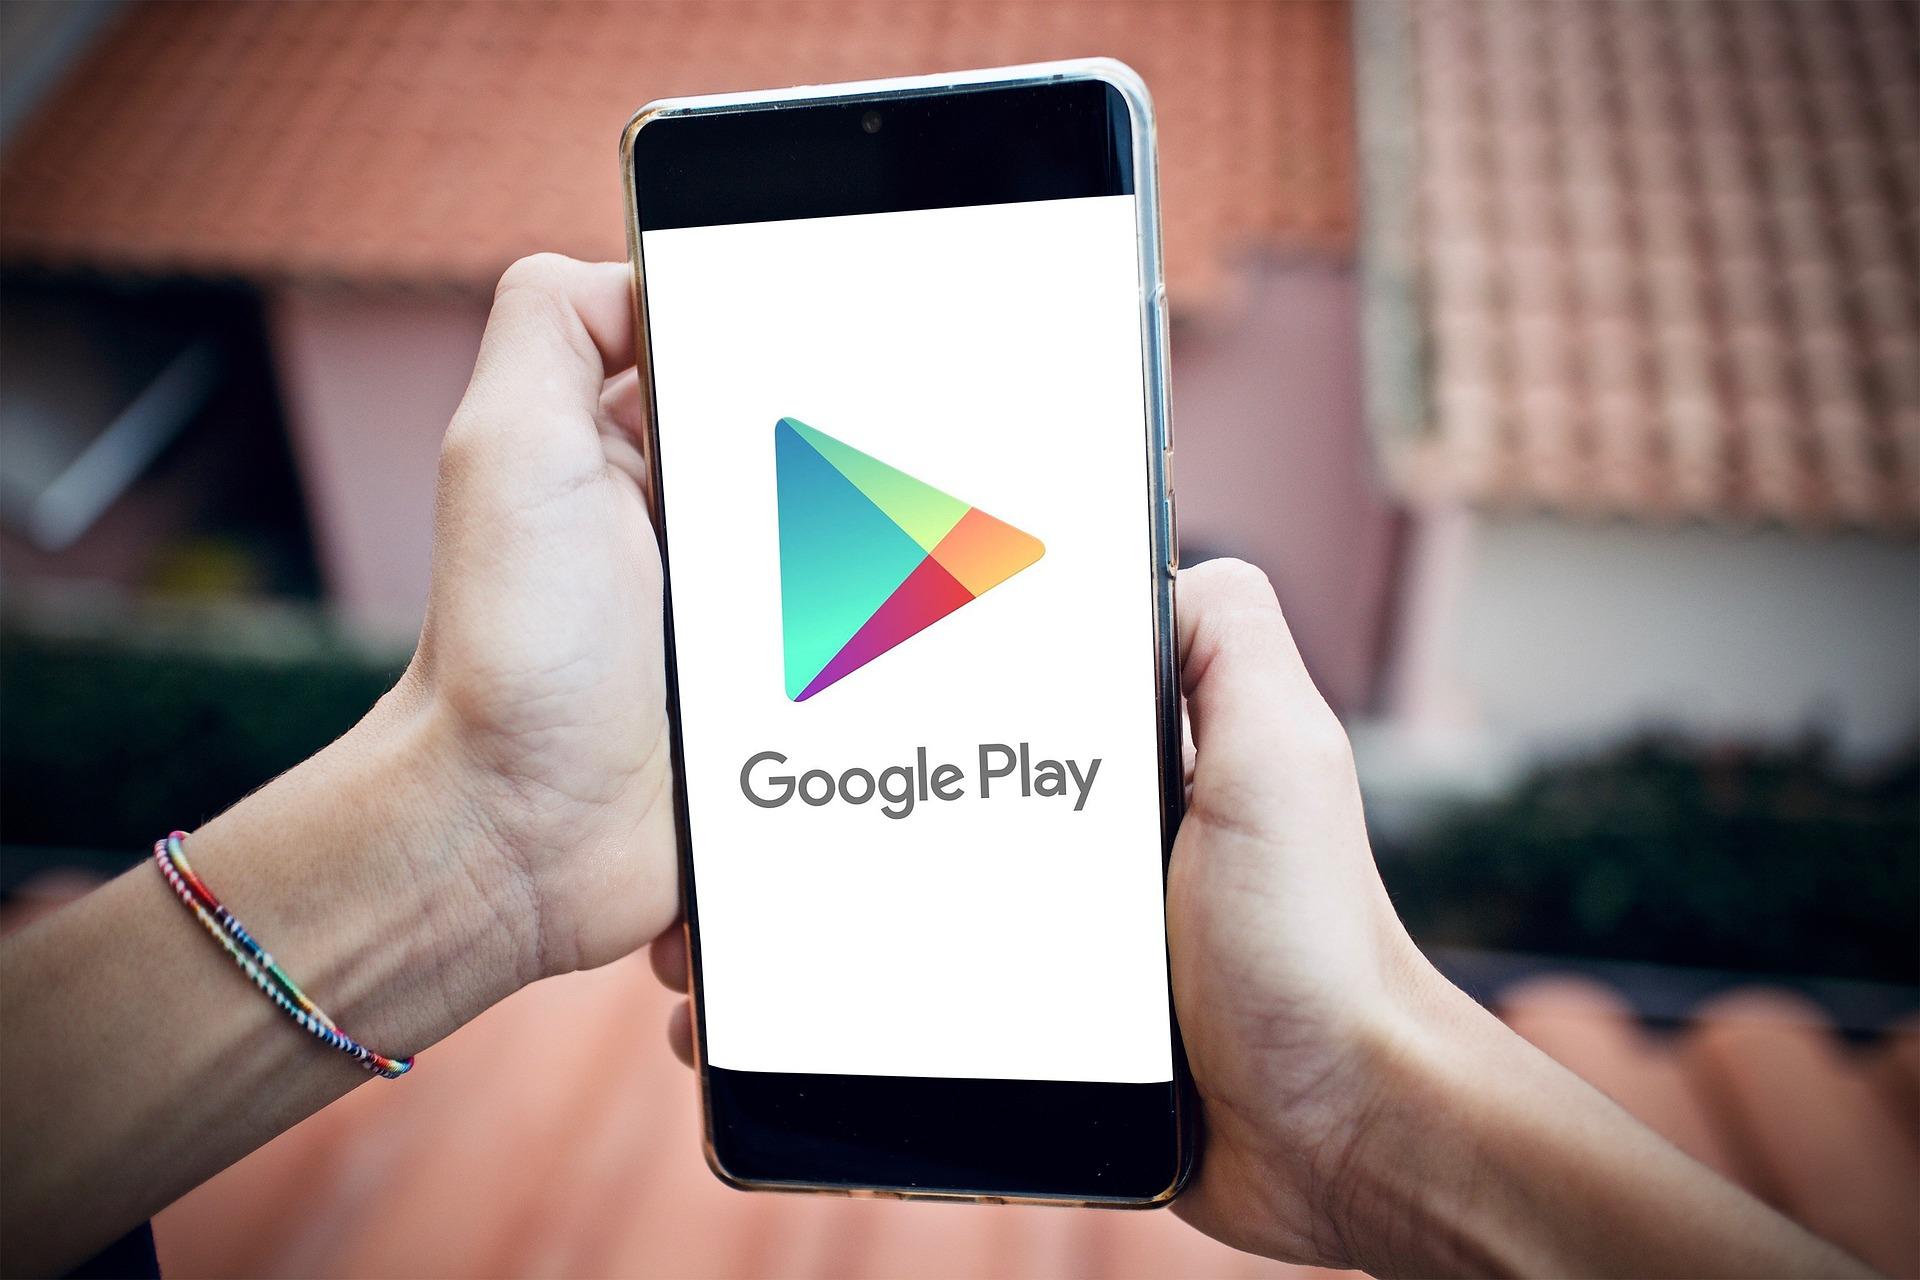 Tokenized Apps and Games on Google Play!